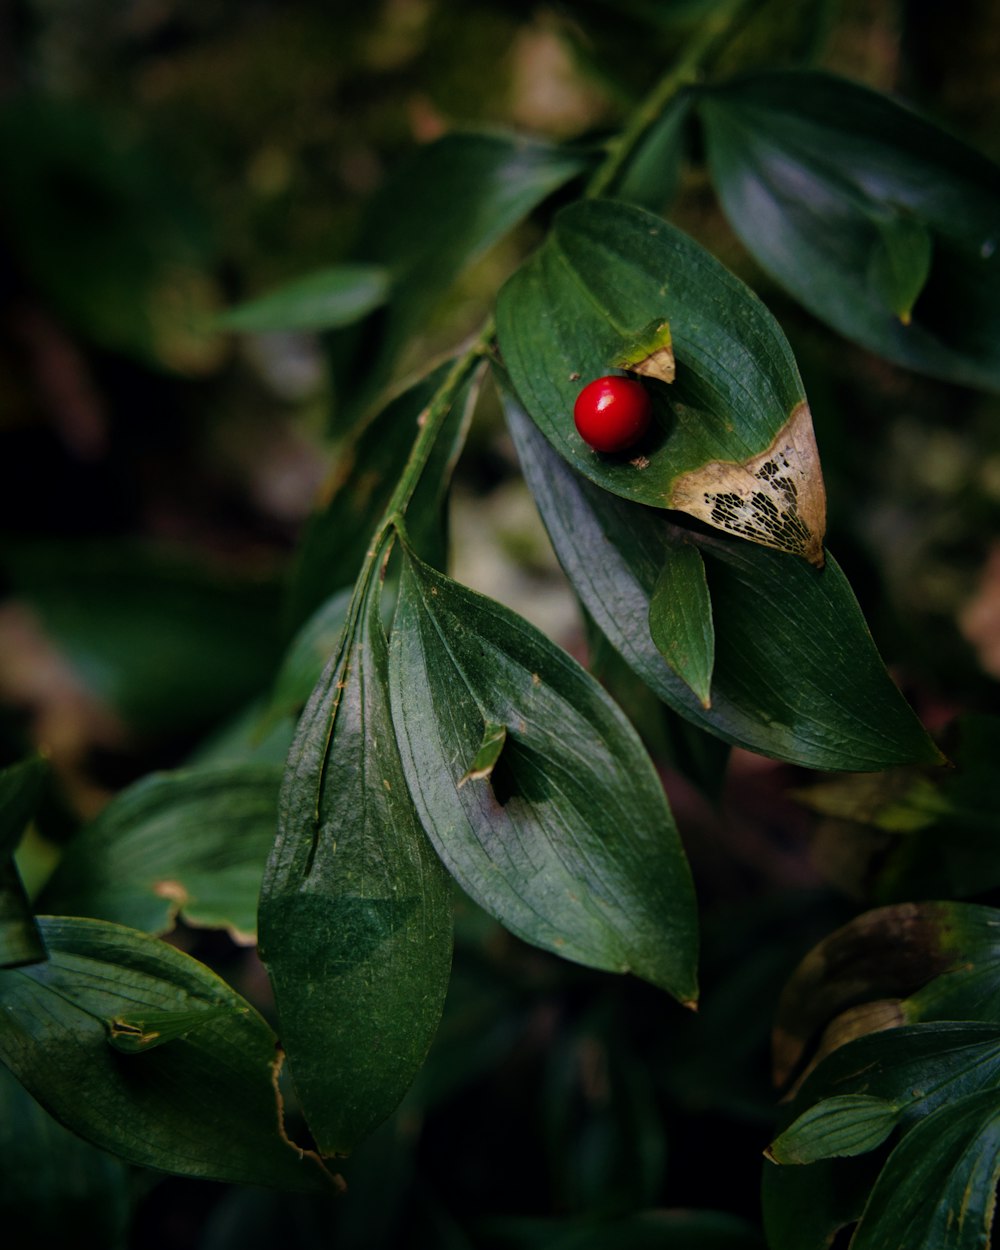 red round fruit on green leaves